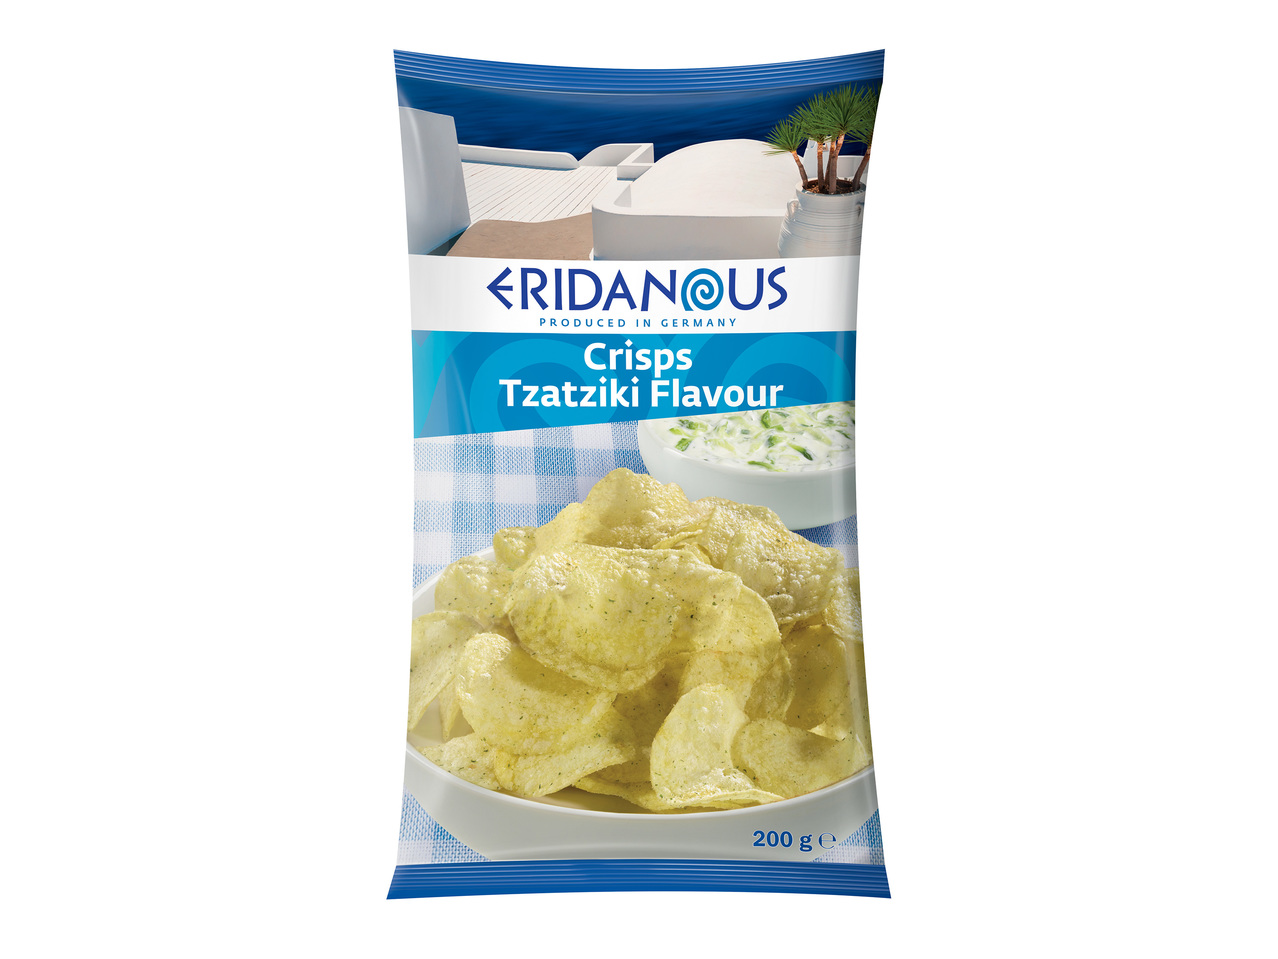 Chips1